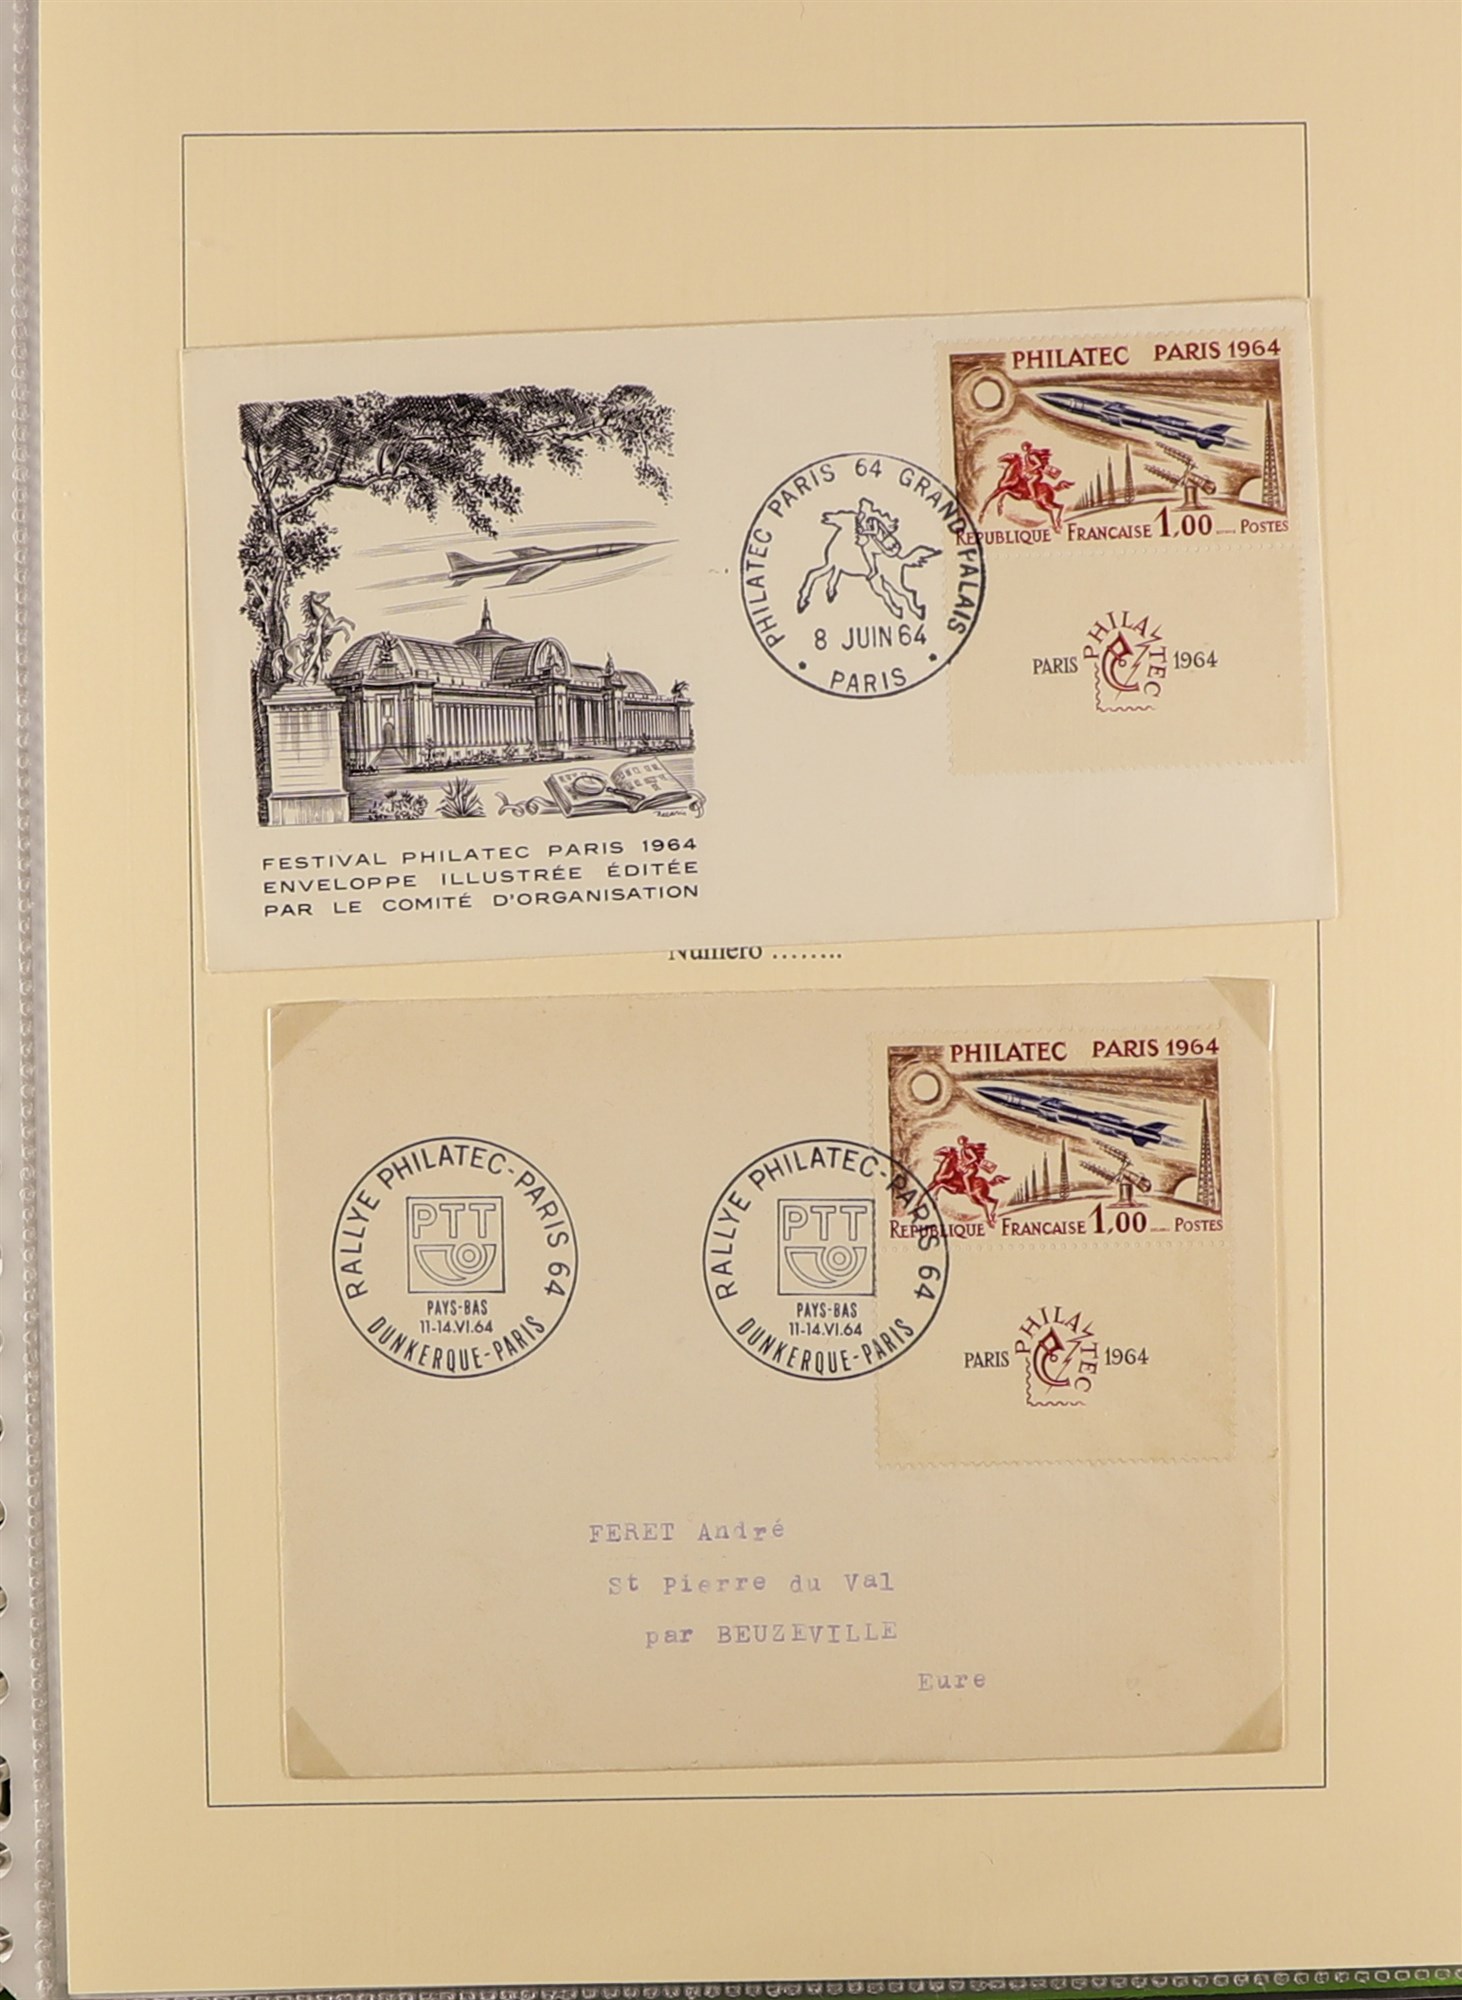 FRANCE 1960 - 1965 COVERS / CARDS COLLECTION of commemorative stamps on covers, cards, parcel labels - Image 11 of 24